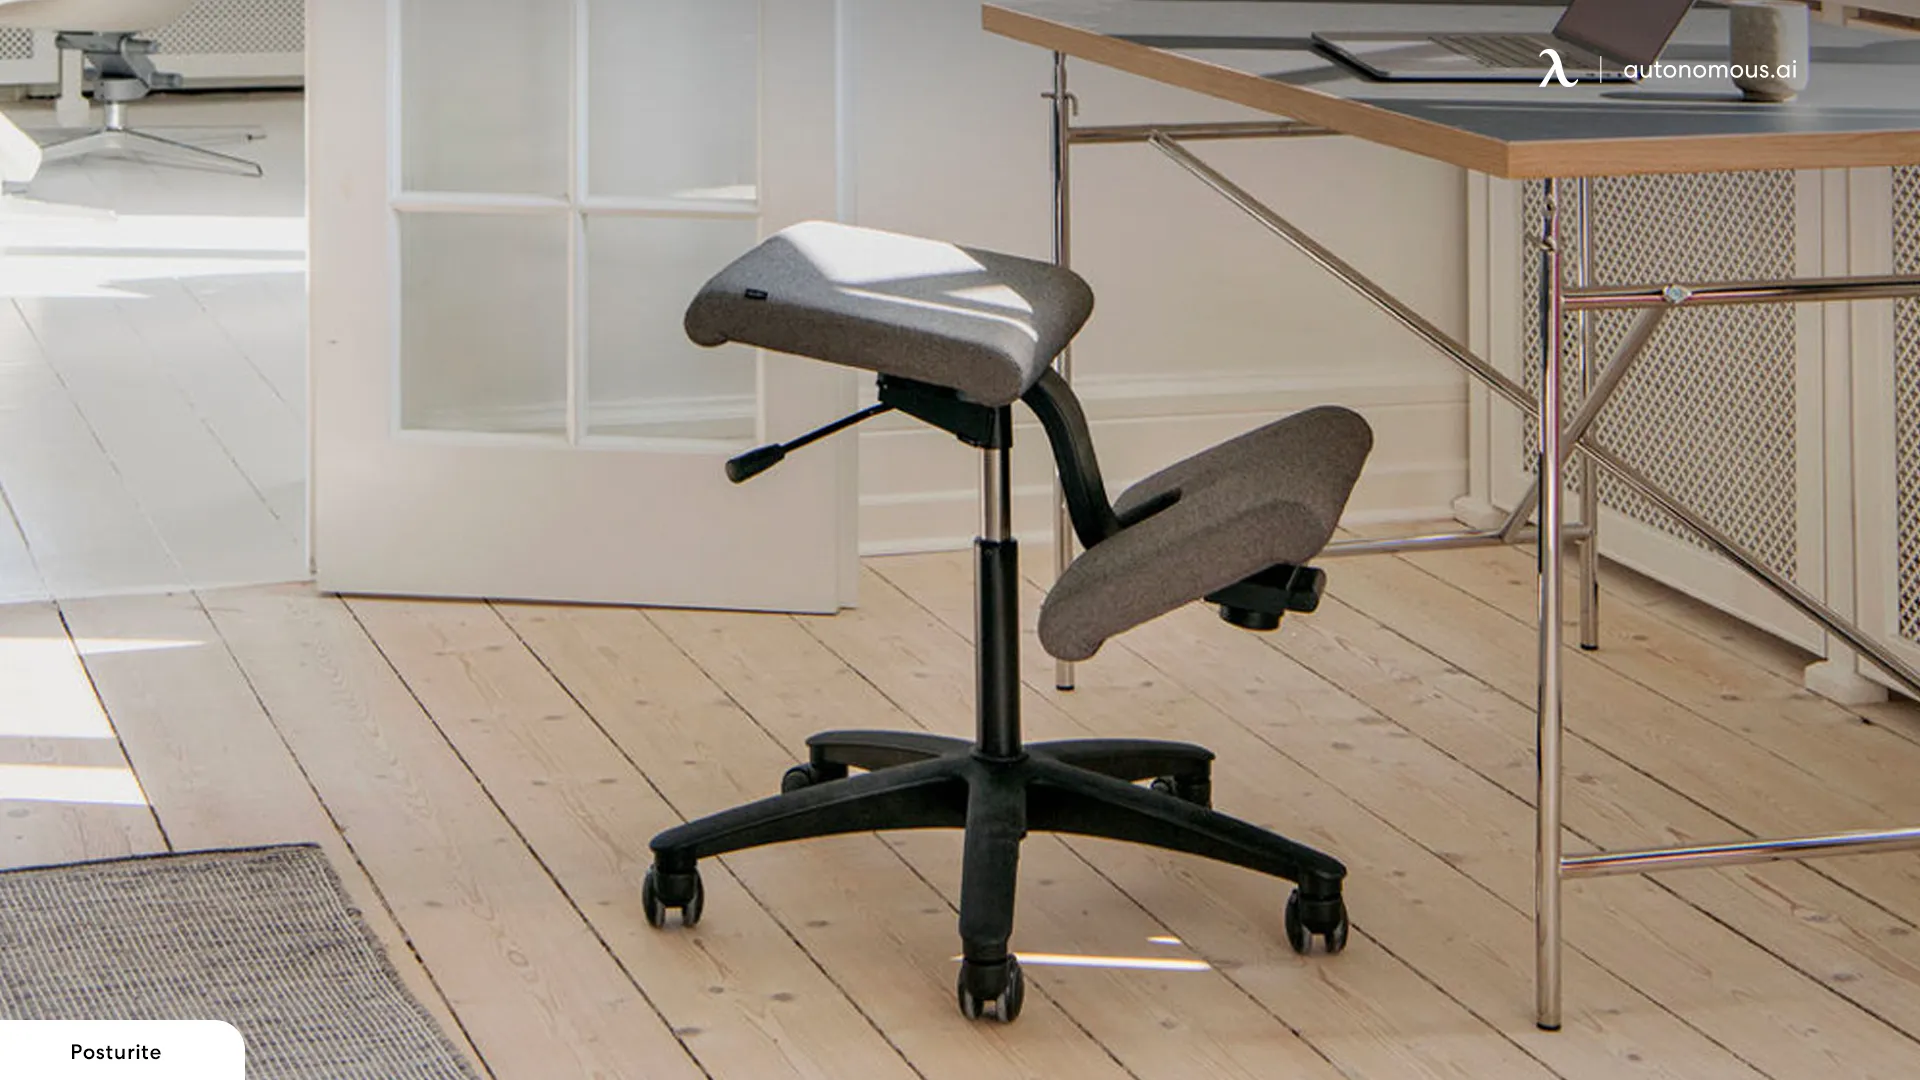 Adjustable Height - forward-leaning chair